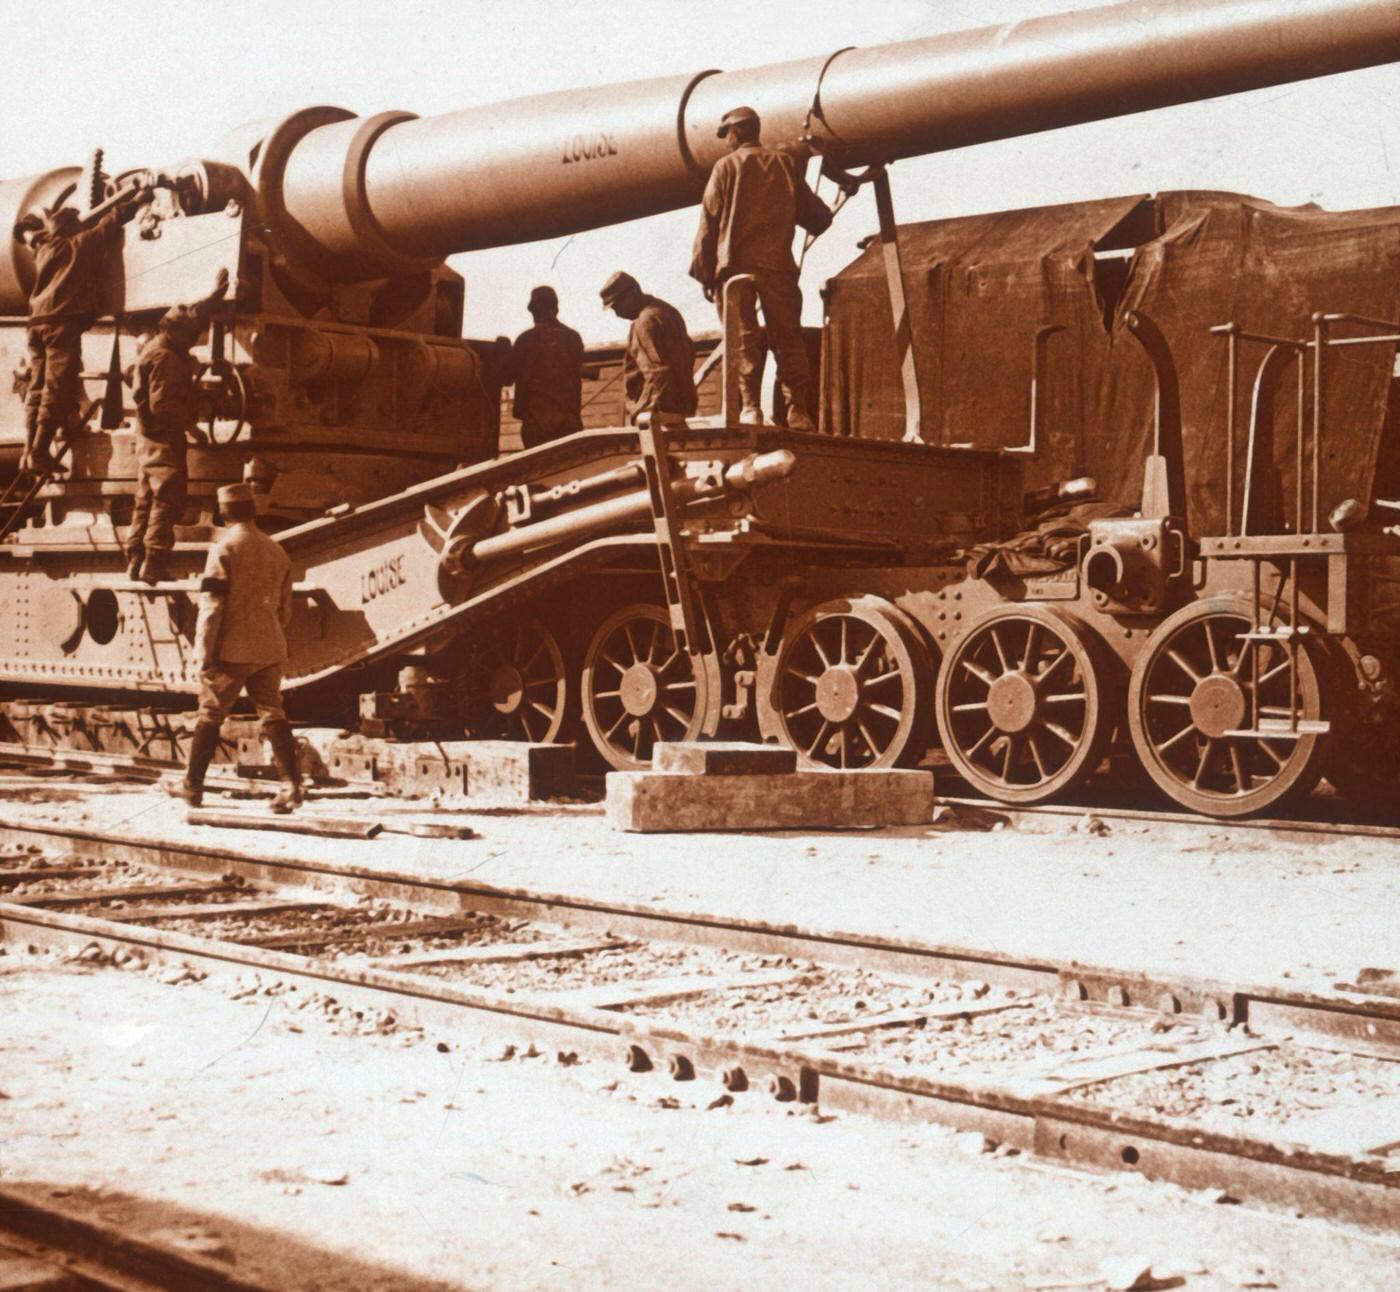 370 mm railway gun named "Louise" in Mailly, northern France, 1914-1918.